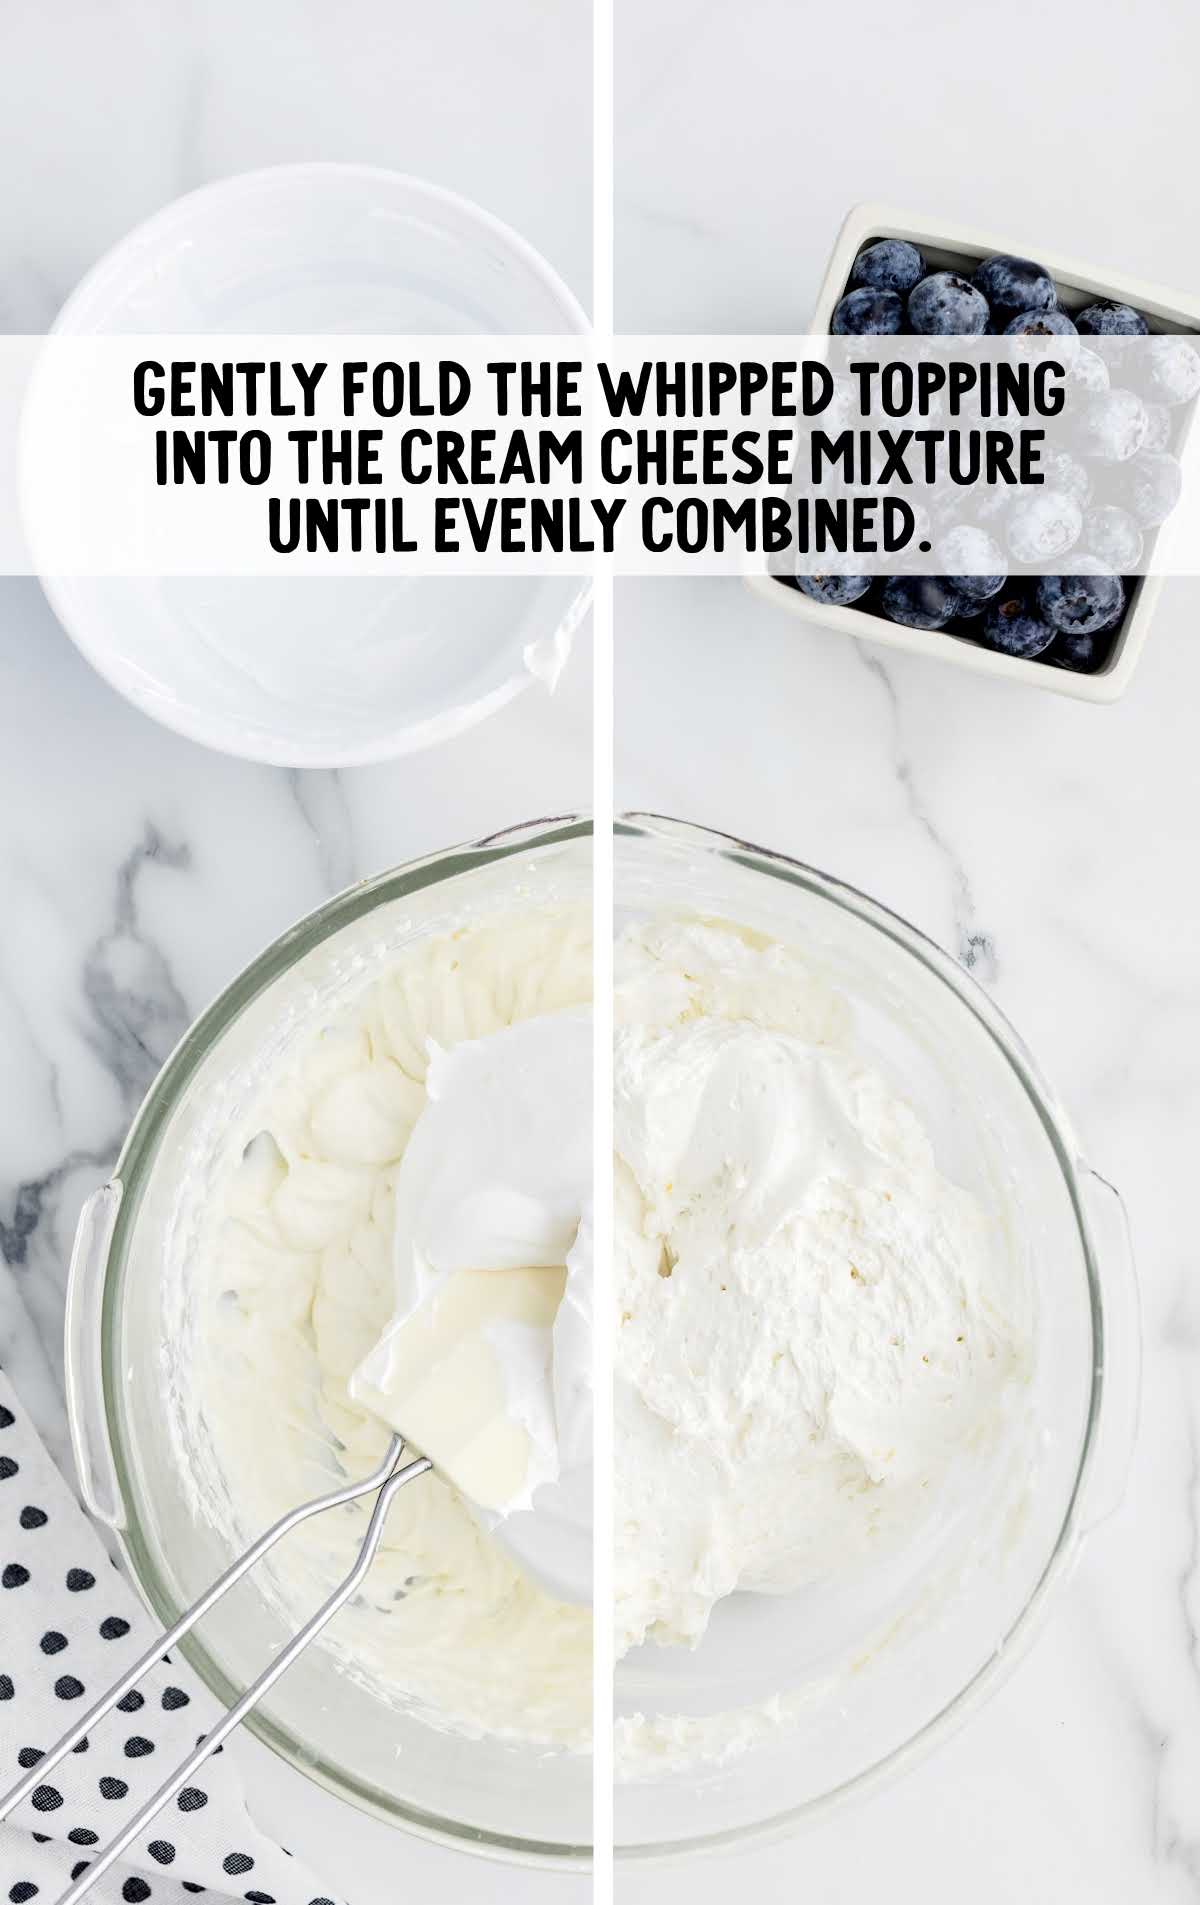 whipped topping folded into the cream cheese mixture